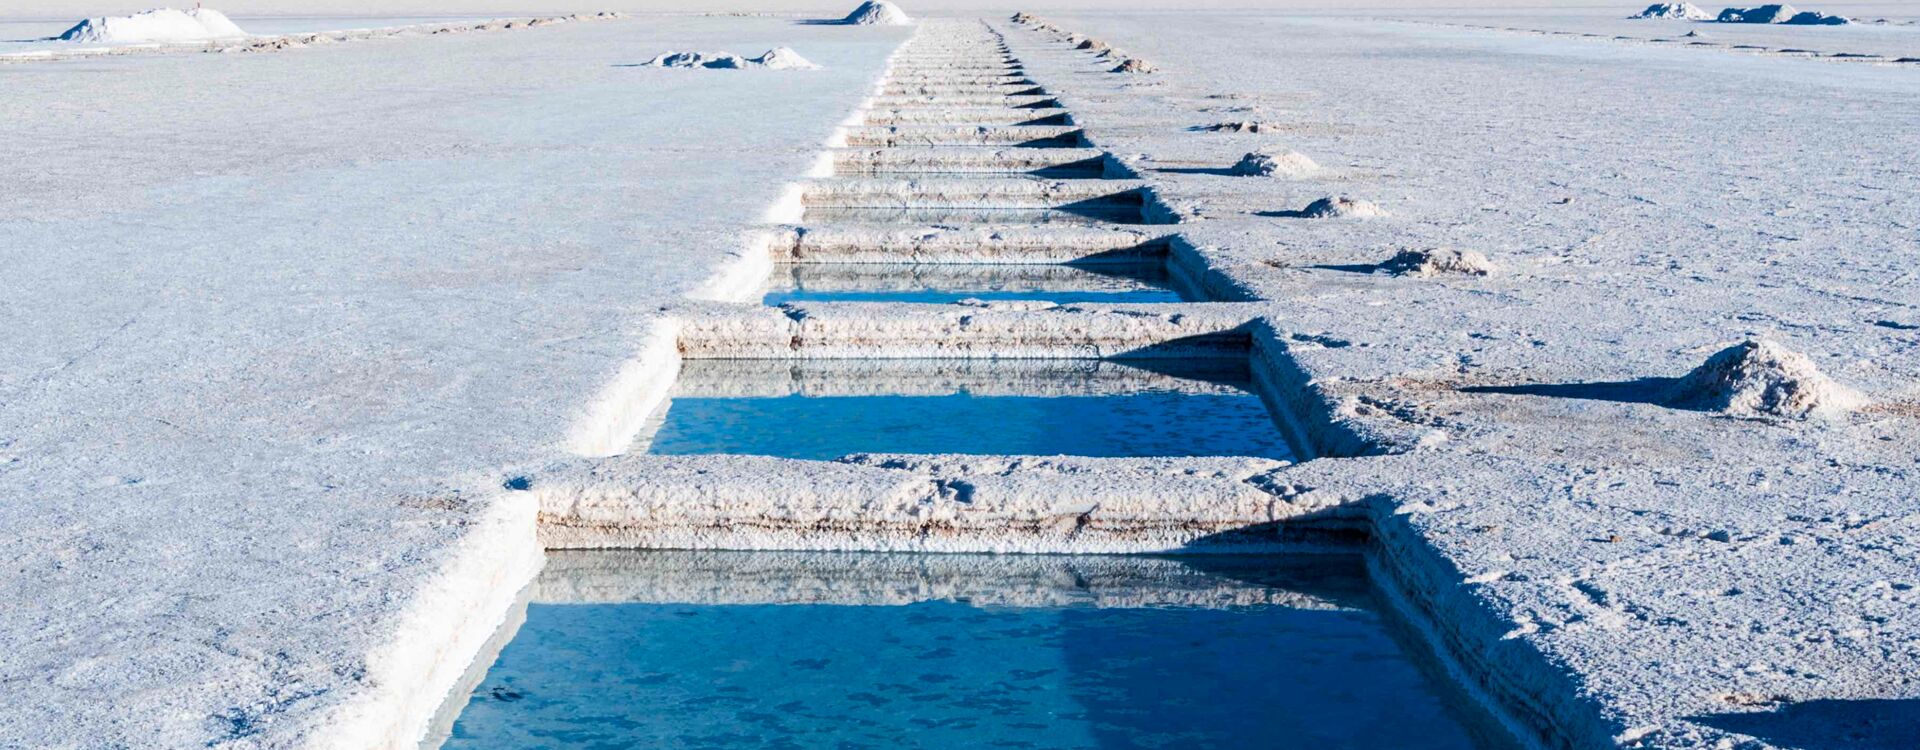 Lithium extraction leads to human rights violations in the Salinas Grandes salt flats in Argentina and many other places